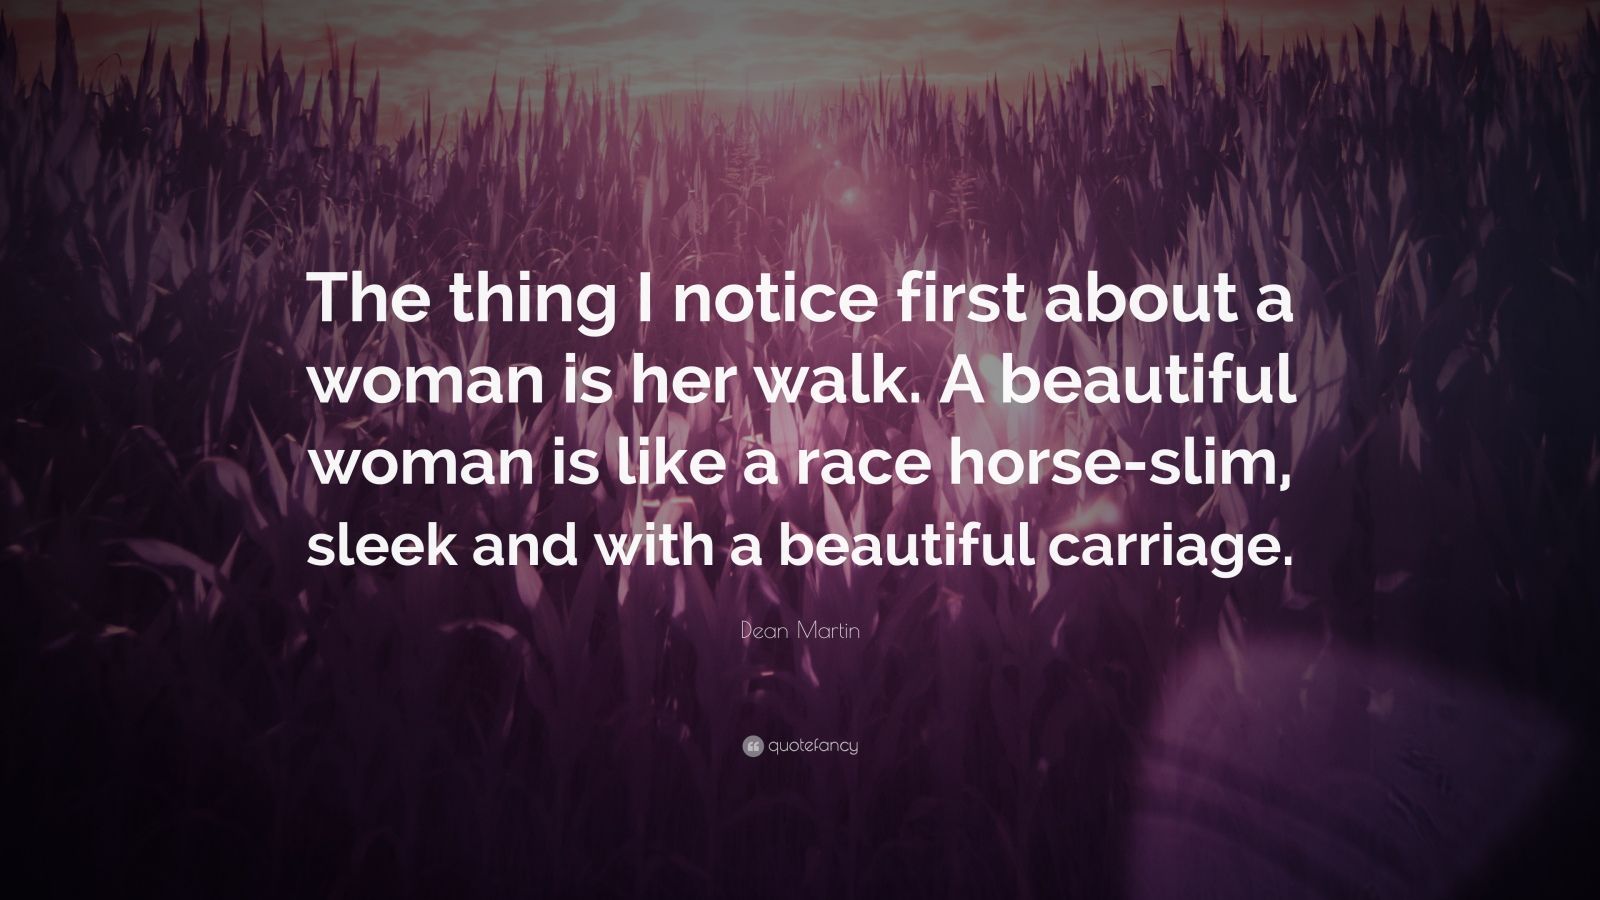 Dean Martin Quote: “The thing I notice first about a woman is her walk. A beautiful woman is like a race horse-slim, sleek and with a beautiful carriage.”